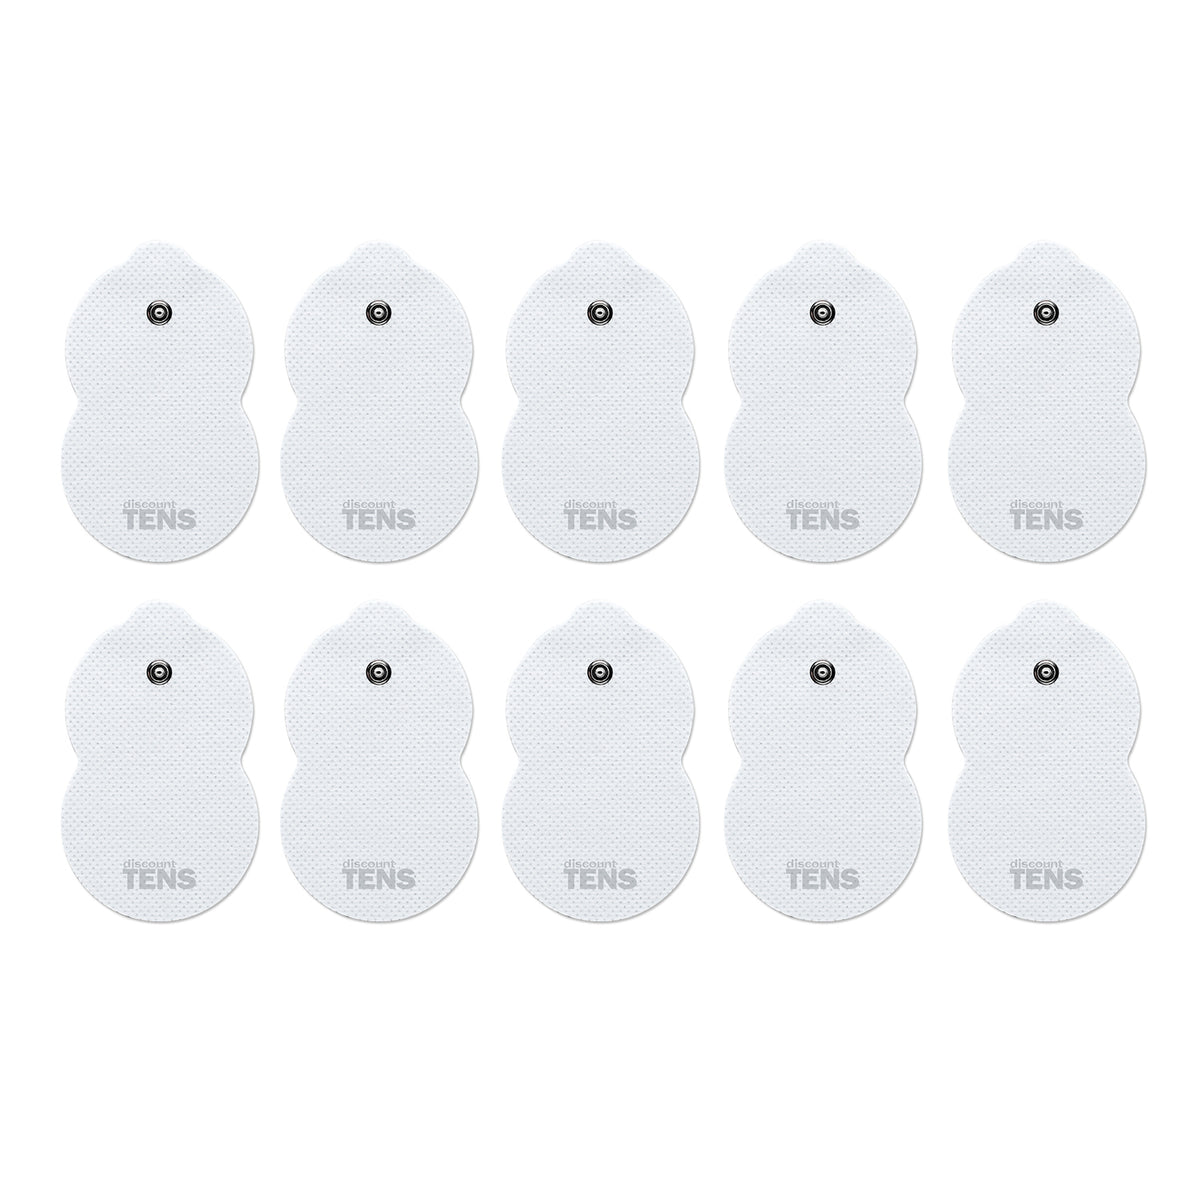 20 Pcs Compatible with Omron TENS Unit Replacement Pads Only Omron  Compatible TENS Pads Long Life Replacement Pads (not Omron Brand) 10 Pairs  Brand: DOMAS - Yahoo Shopping